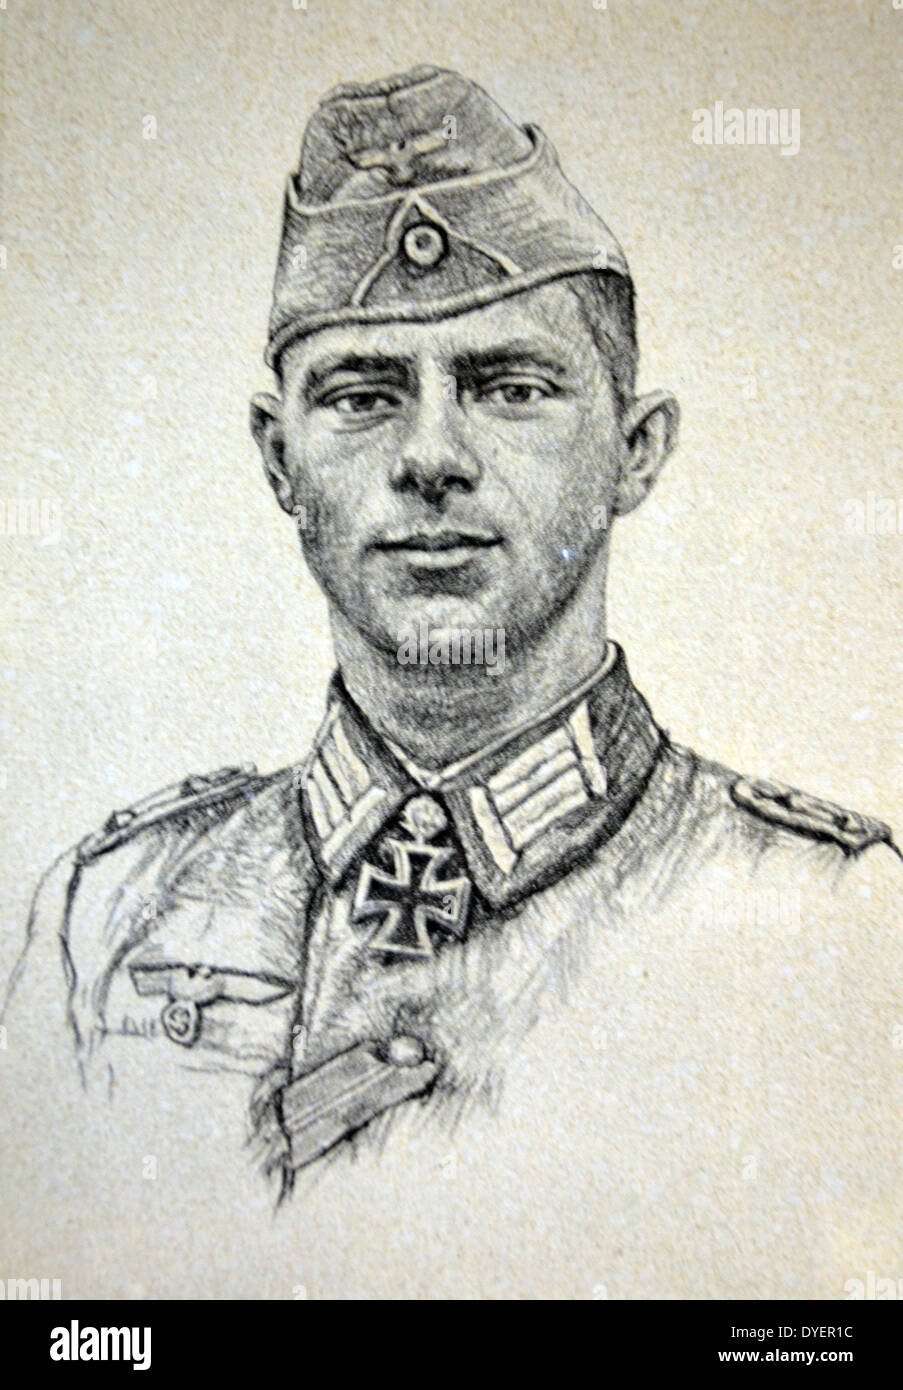 German world war two Postcard, showing Ekkehard Kylling-Schmidt (1918 –  2000)  a highly decorated pilot in the Wehrmacht during World War II. He was also a recipient of the Knight's Cross of the Iron Cross with Oak Leaves. The Knight's Cross of the Iron Cross and its higher grade Oak Leaves was awarded Stock Photo